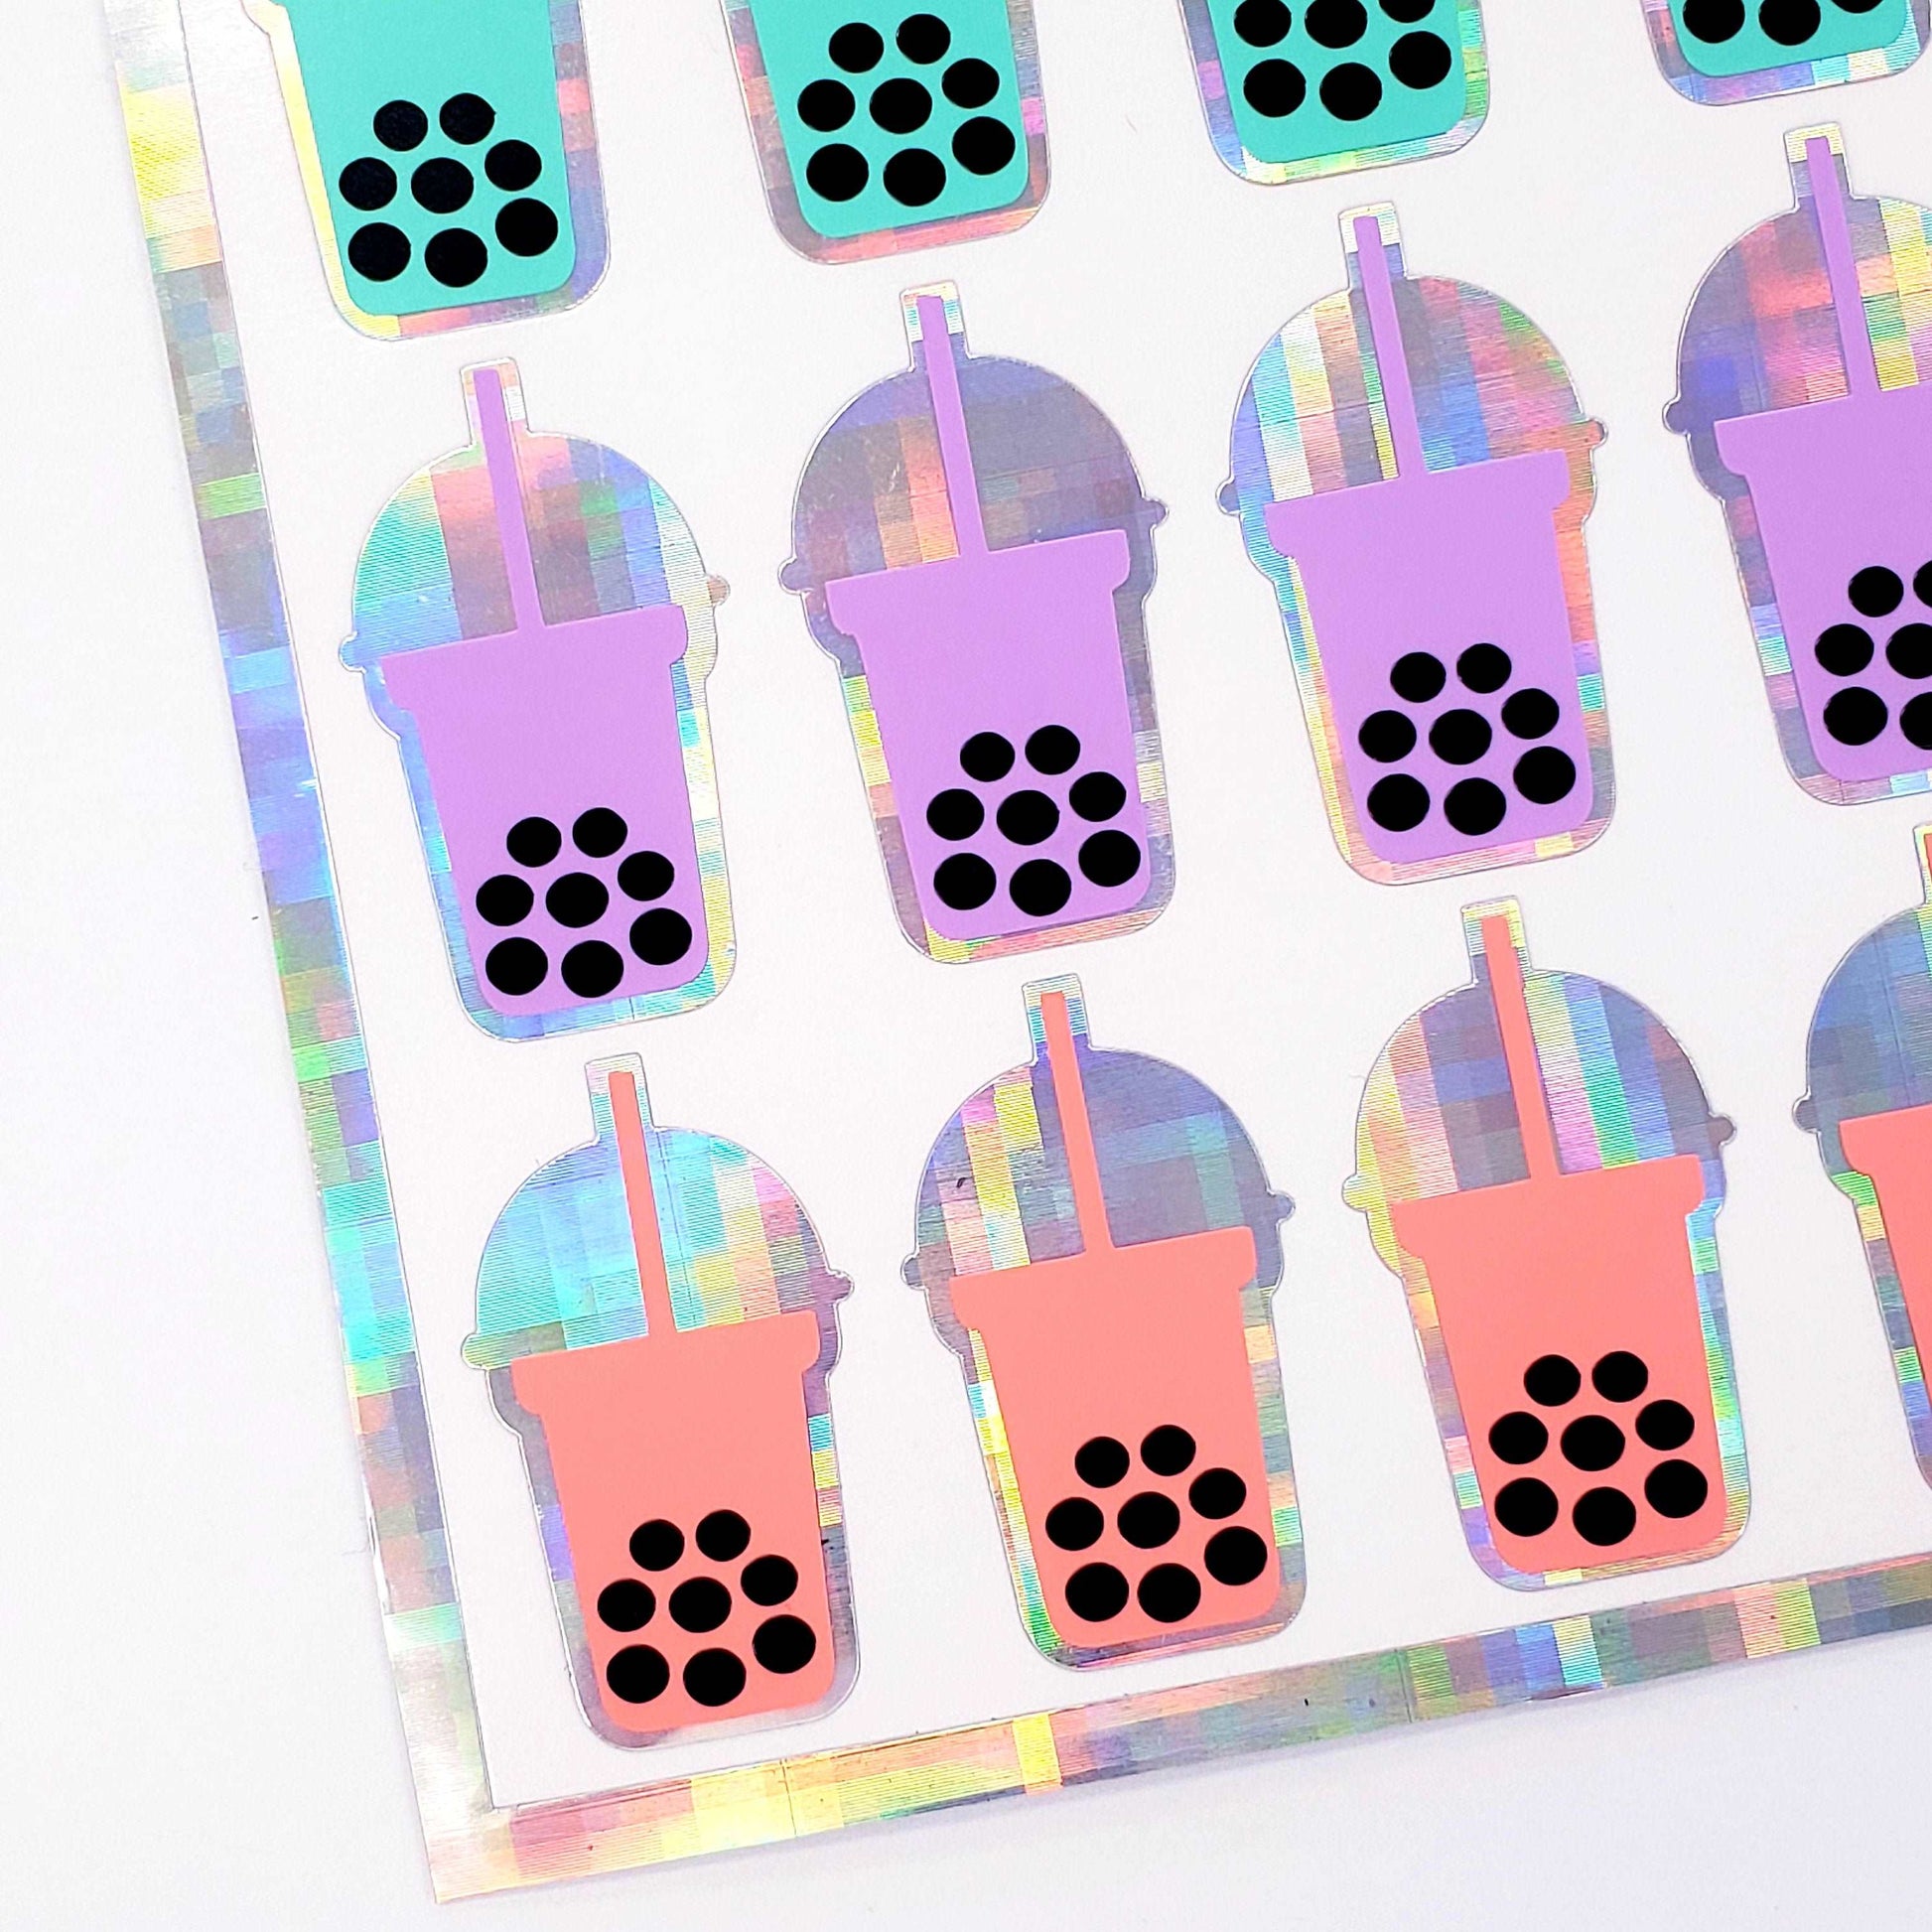 Boba Tea Stickers, set of 36 cute cold drink holographic stickers for calendars, journals, and planners. Bubble tea lover gift. Pastels